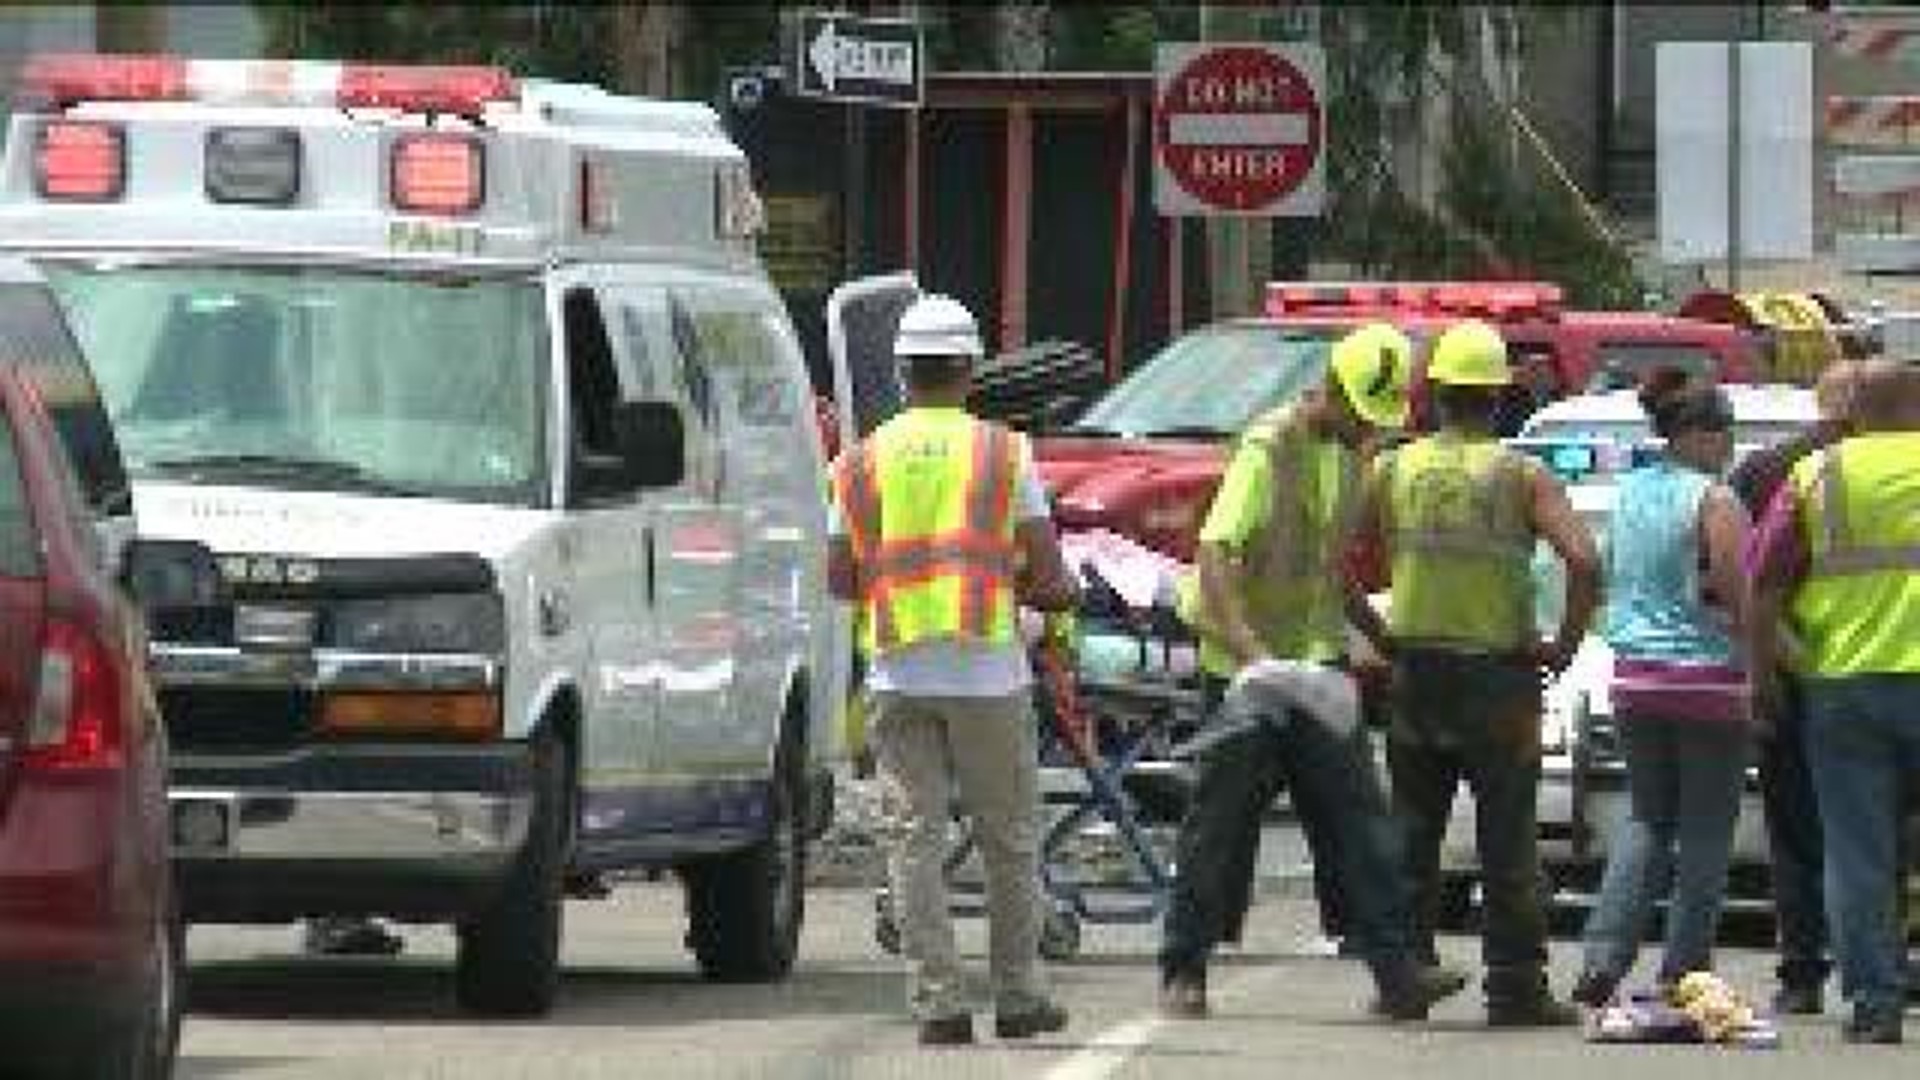 Road Worker Injured While Directing Traffic